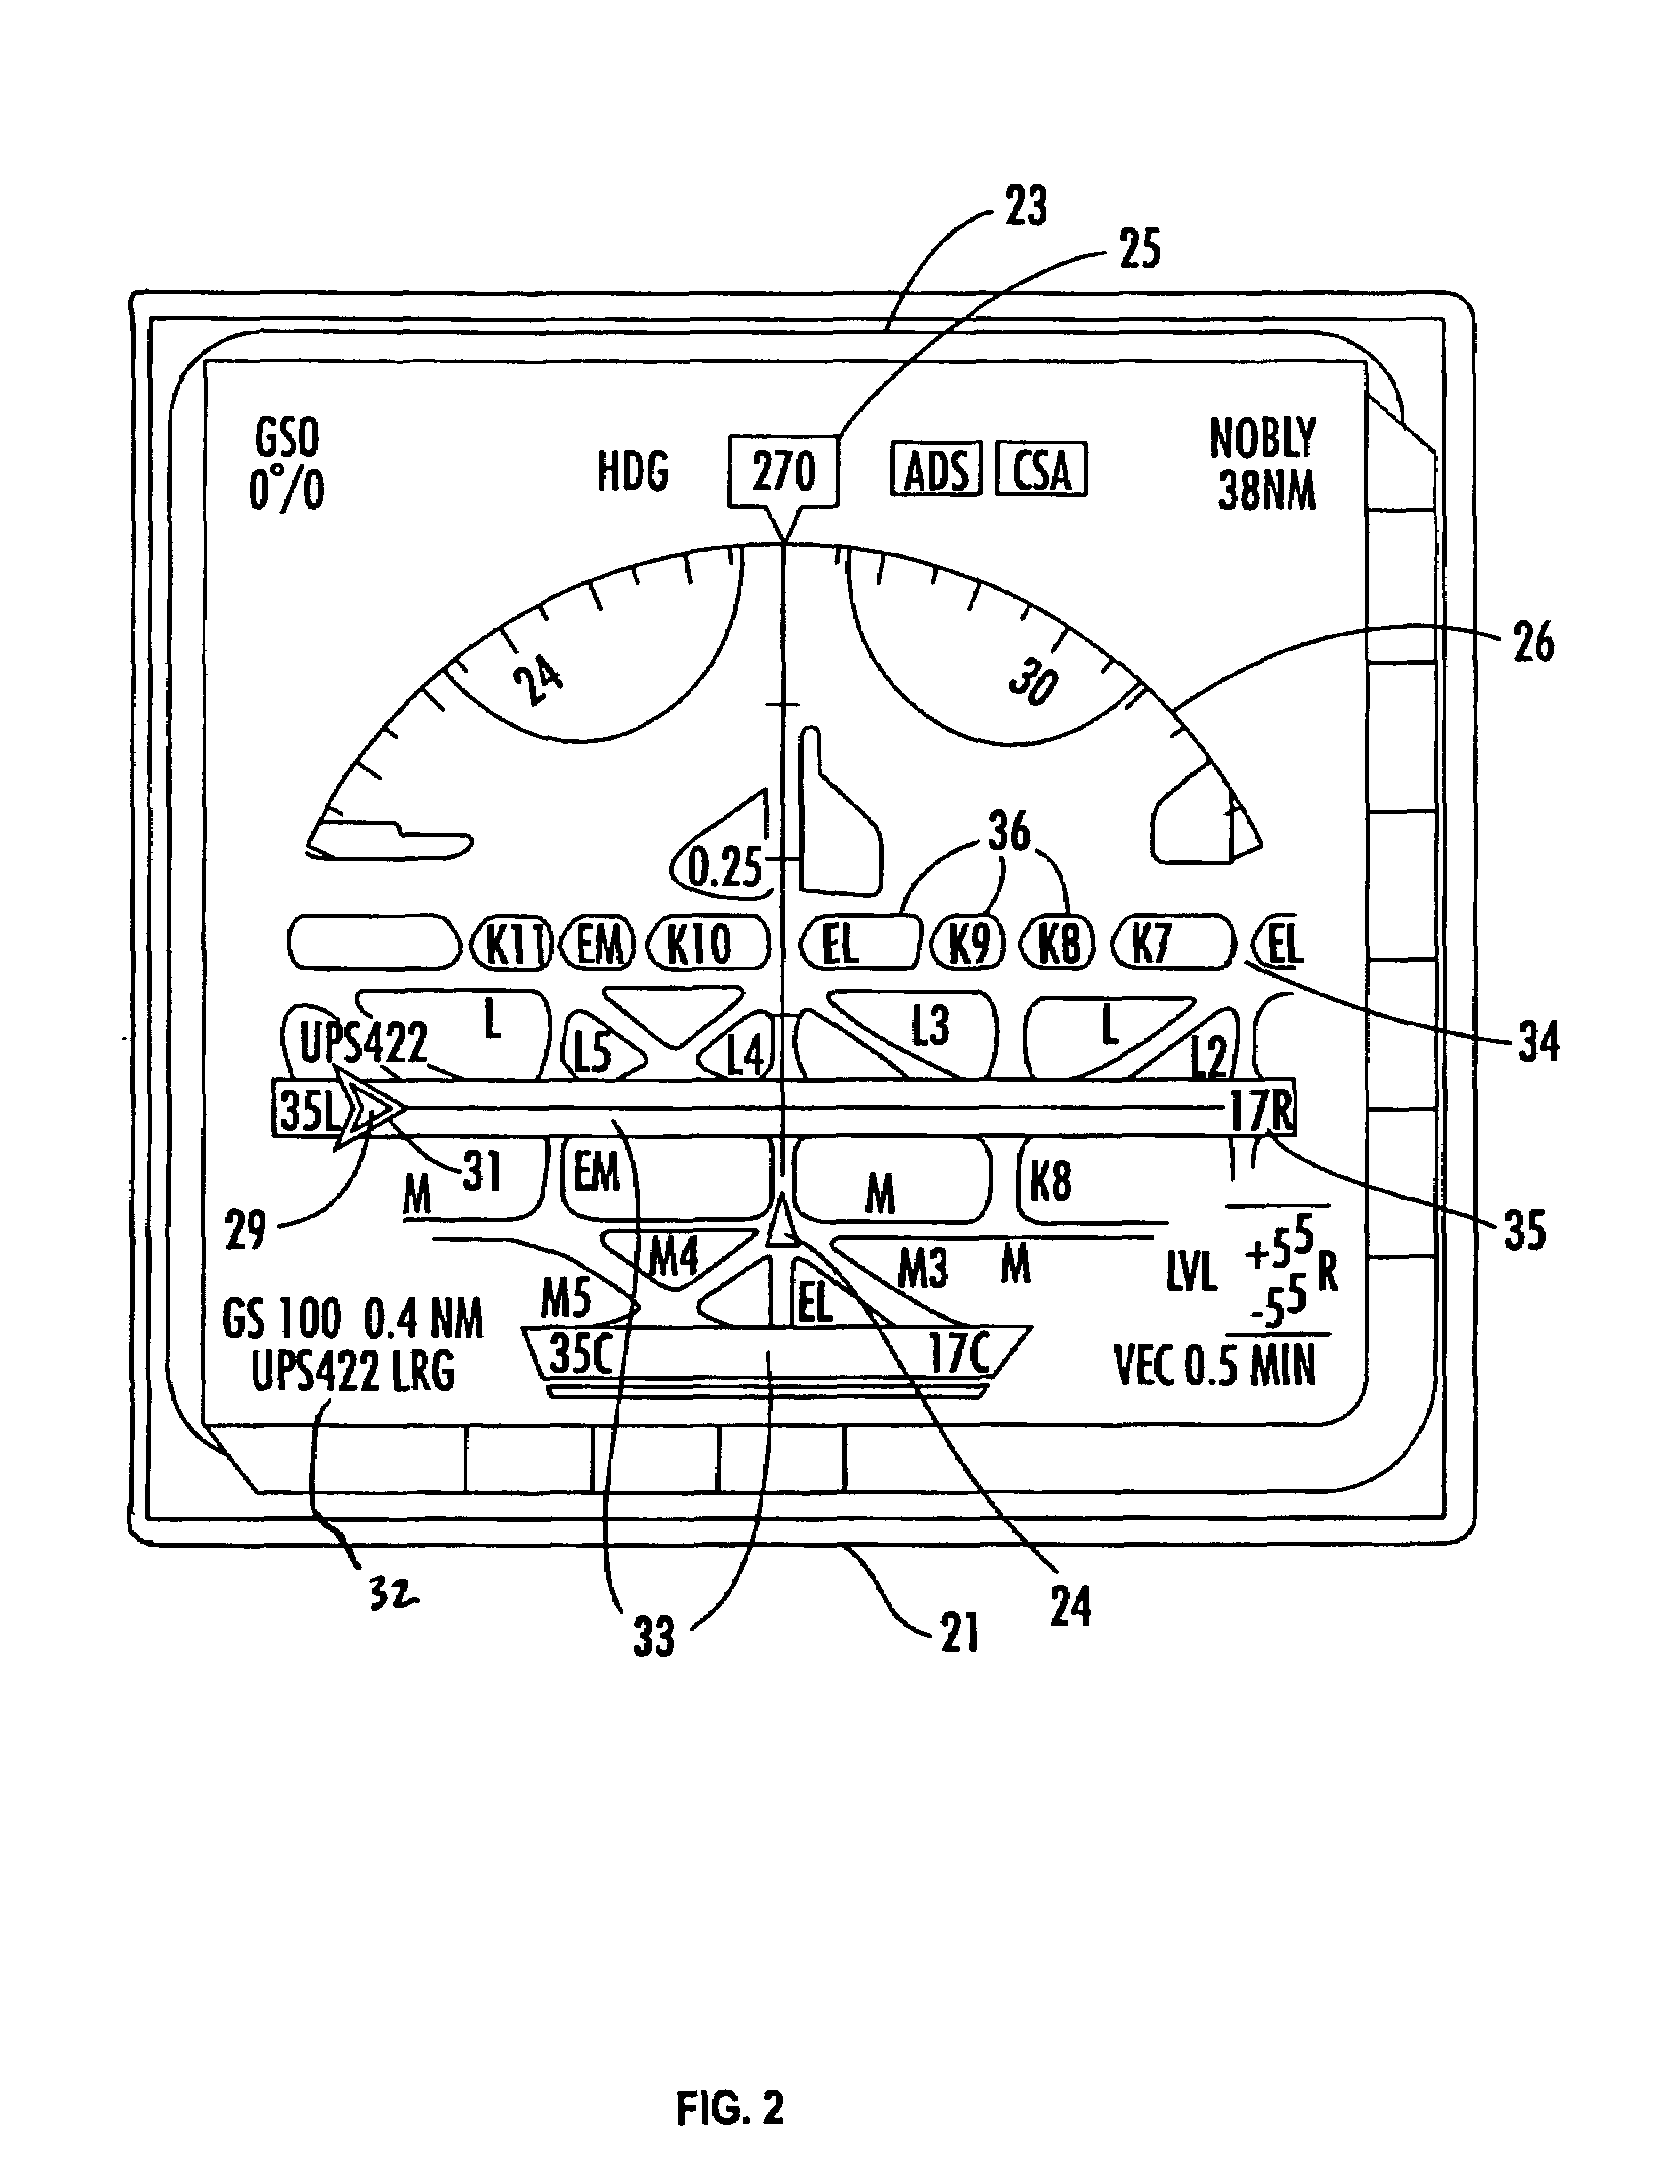 Navigational instrument, method and computer program product for displaying ground traffic information